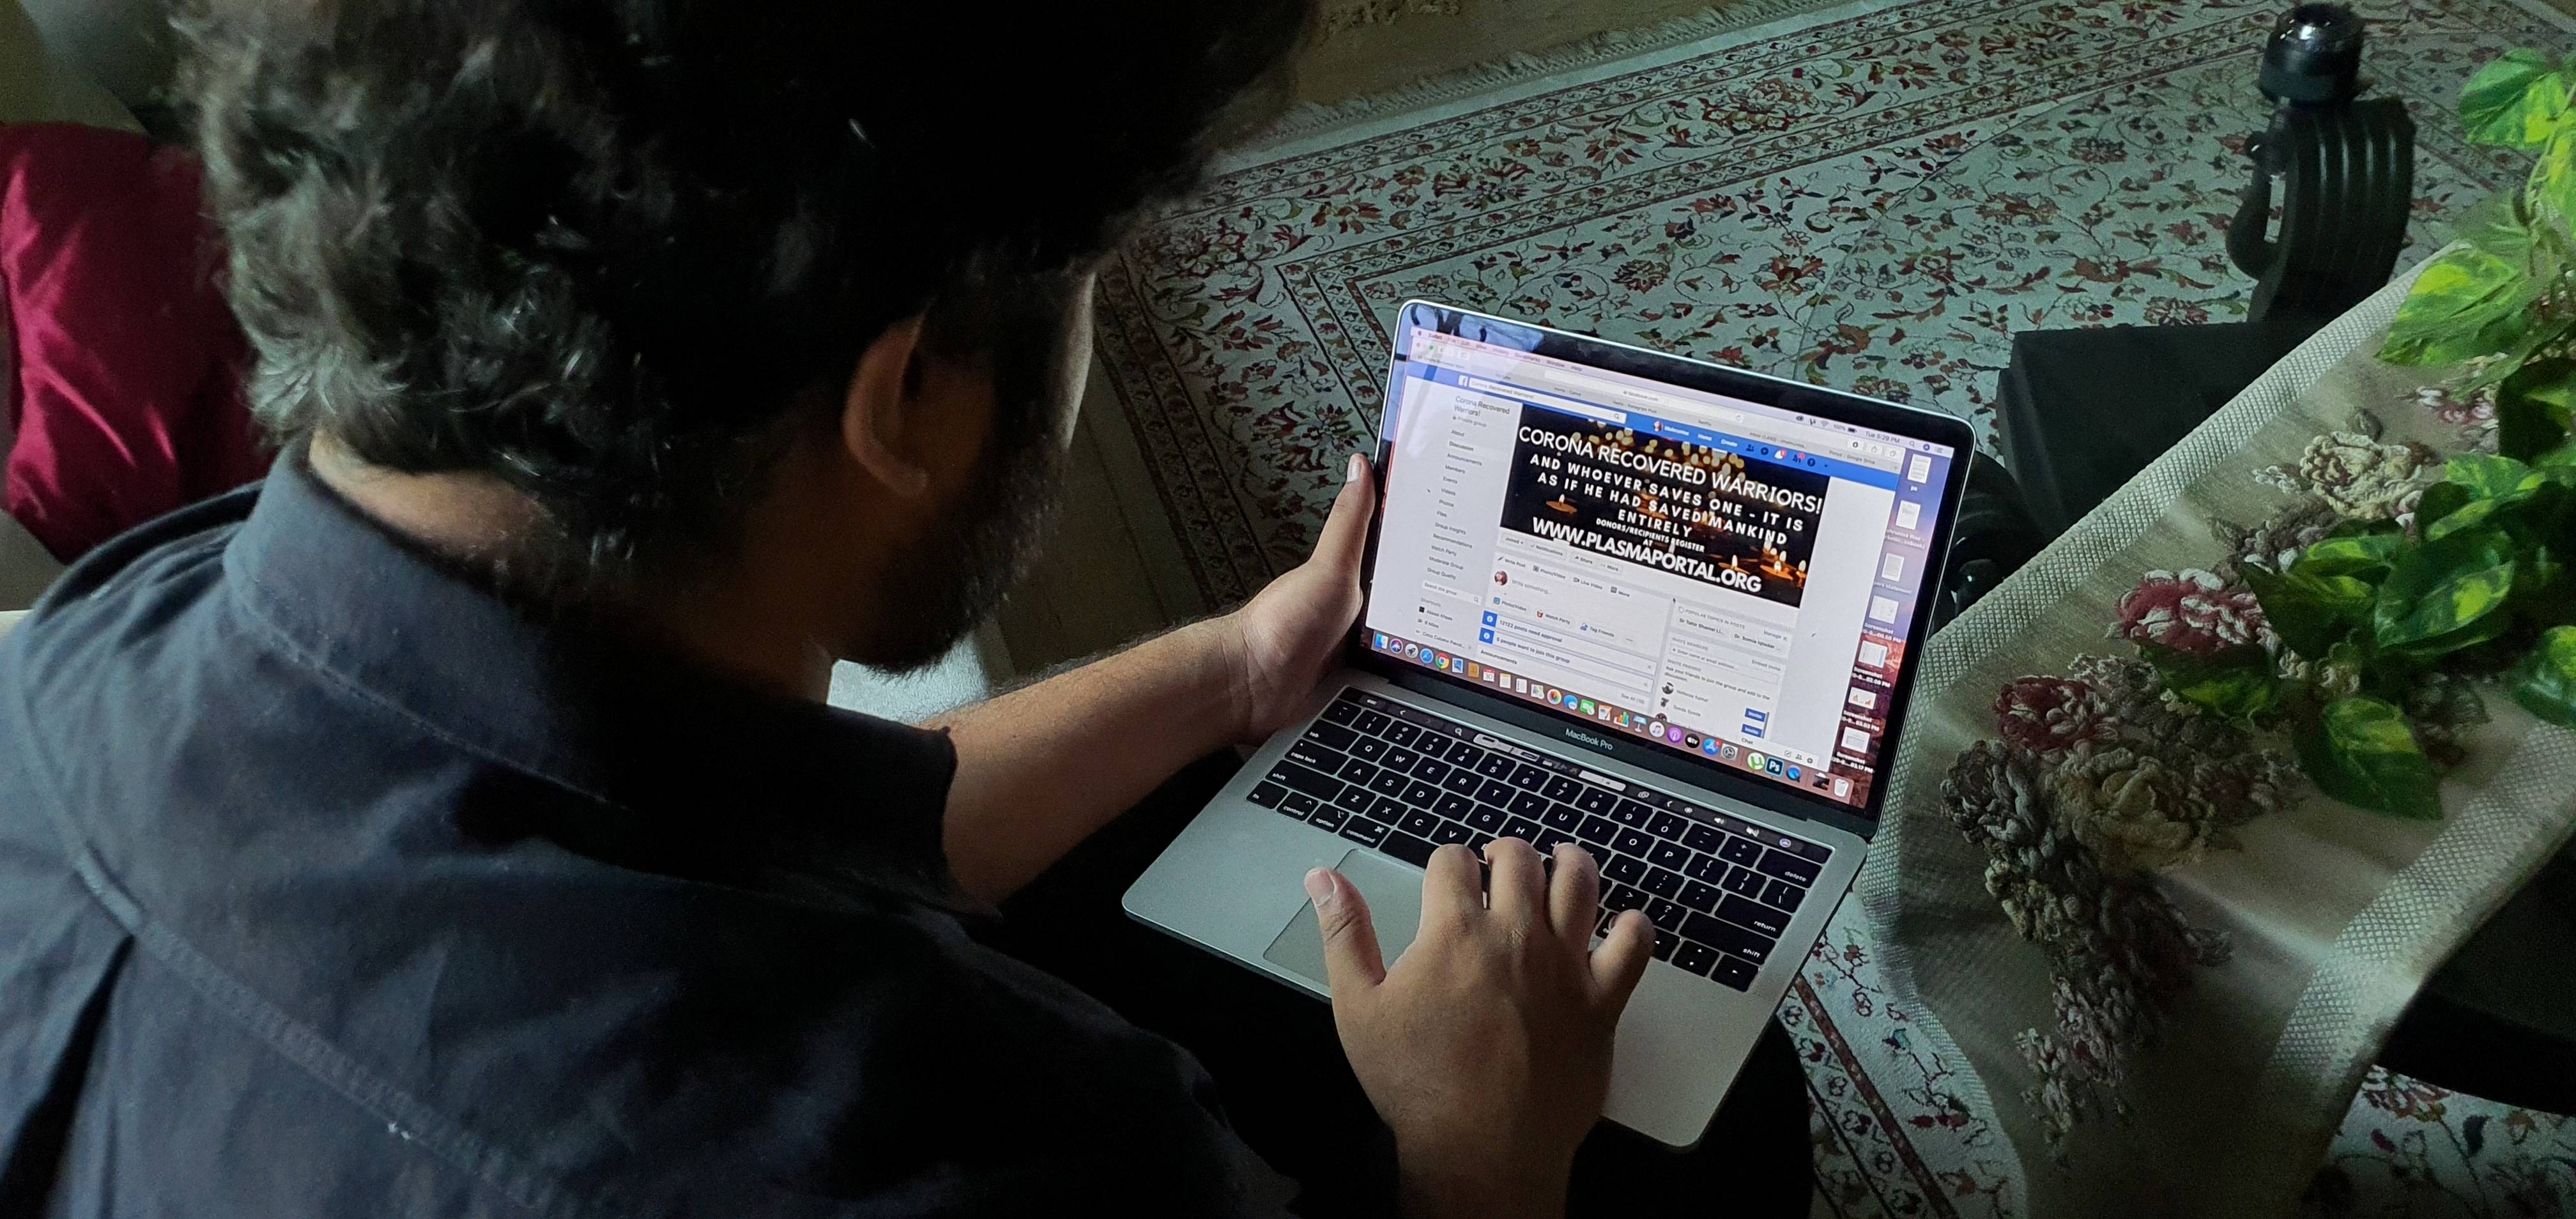 A Facebook employee works on a computer at his residence in Lahore, Pakistana, on June 30. Facebook, which employs about 4,000 people in the U.K., could have half of its employees working remotely over the next five to 10 years, CEO Mark Zuckerberg said in May. | ZORAIZ RIAZ / VIA REUTERS